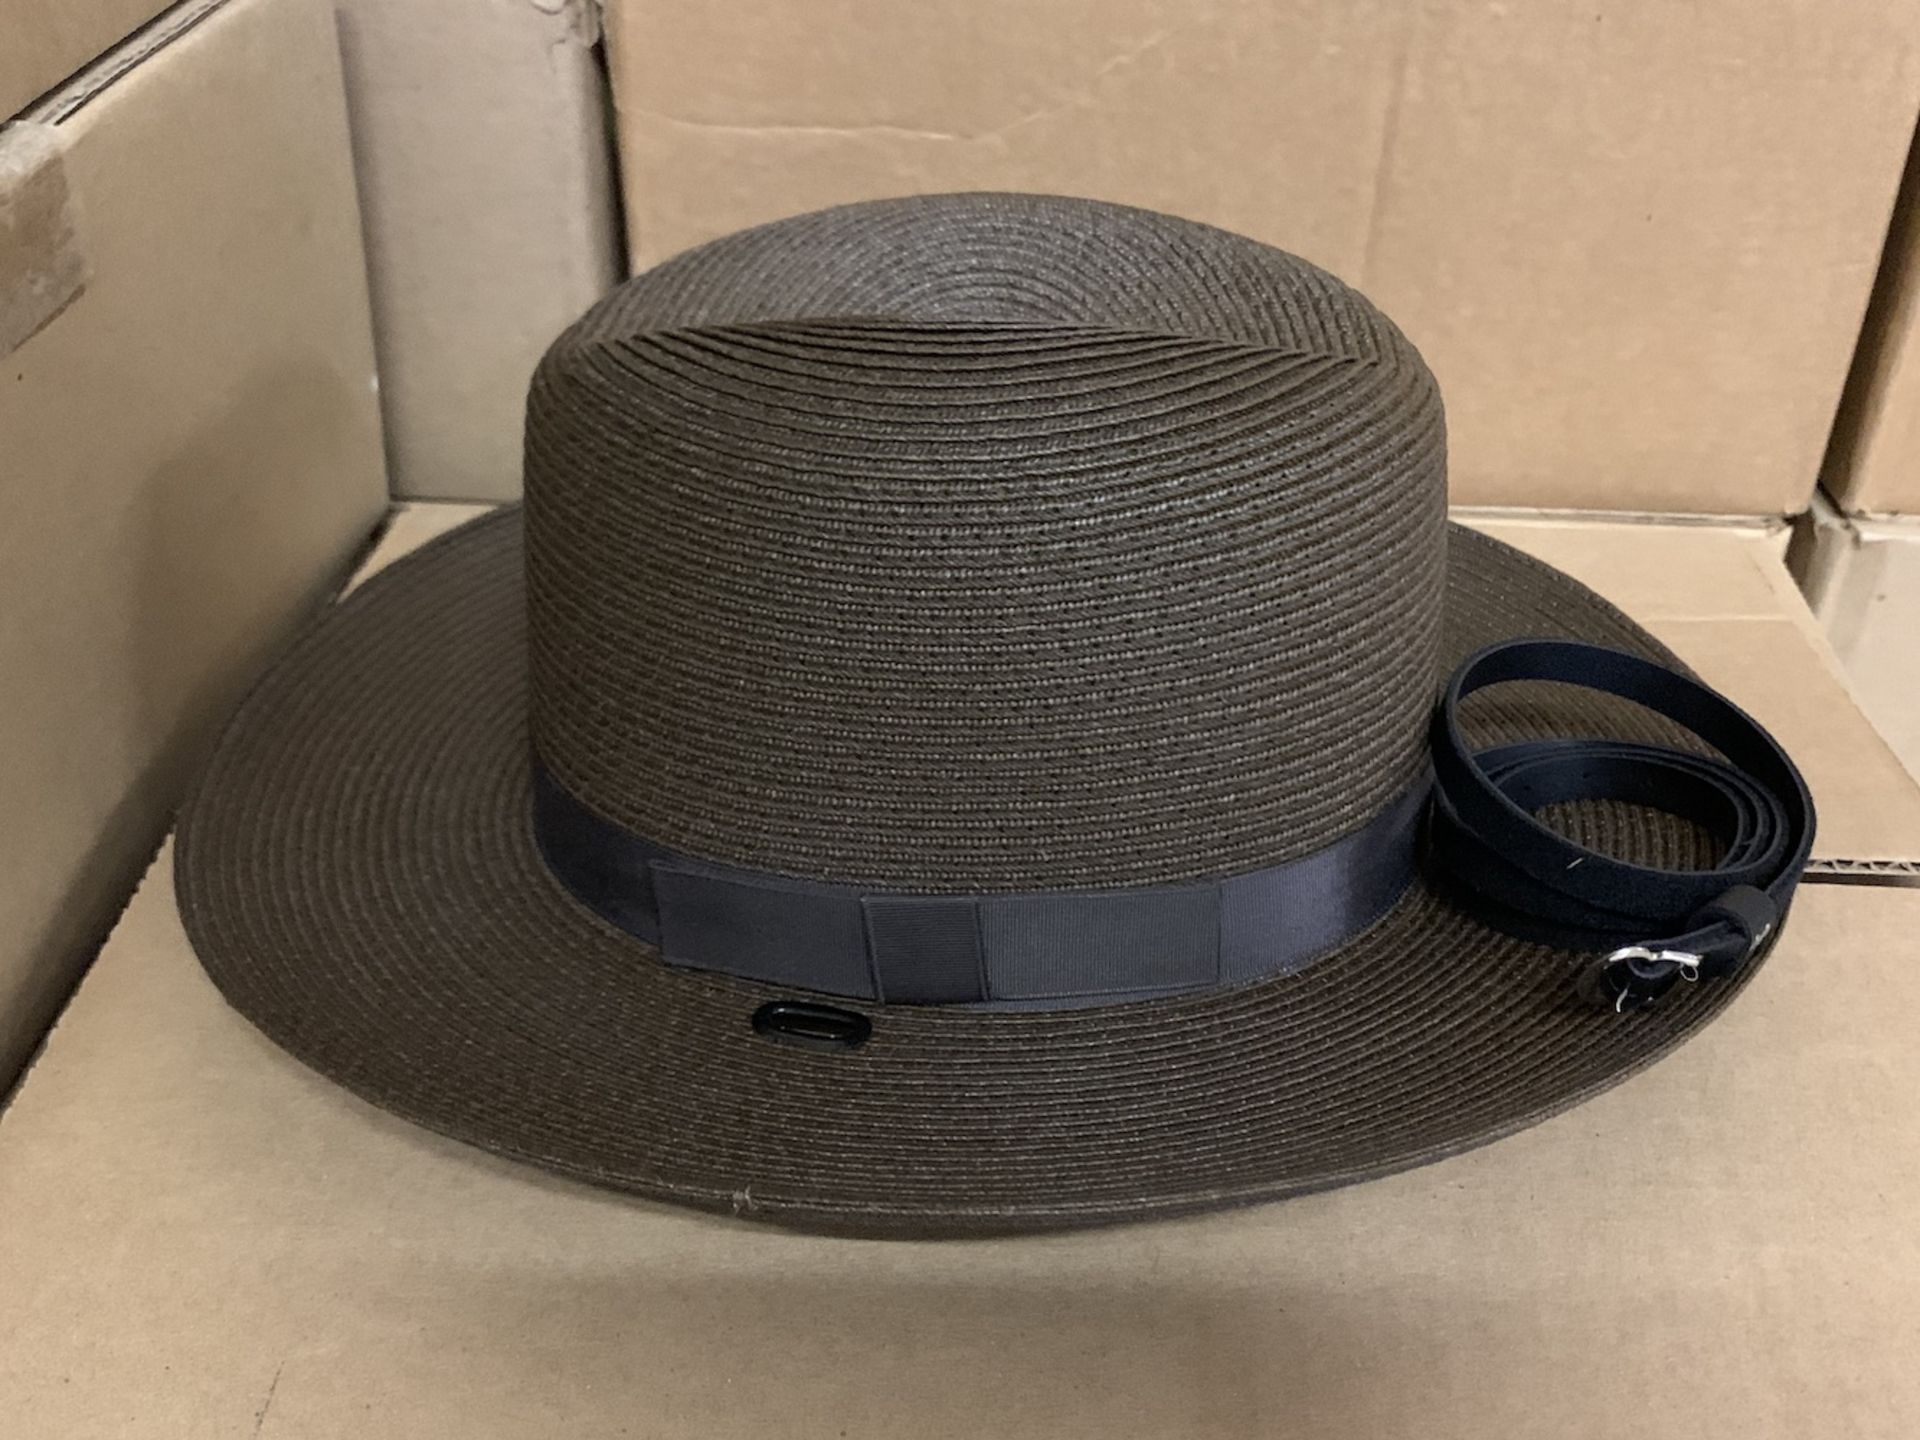 15 Sheriff Uniform Hats, The Lawman Genuine Milano, Straw Single, Various Colors, Various Sizes - Image 7 of 12